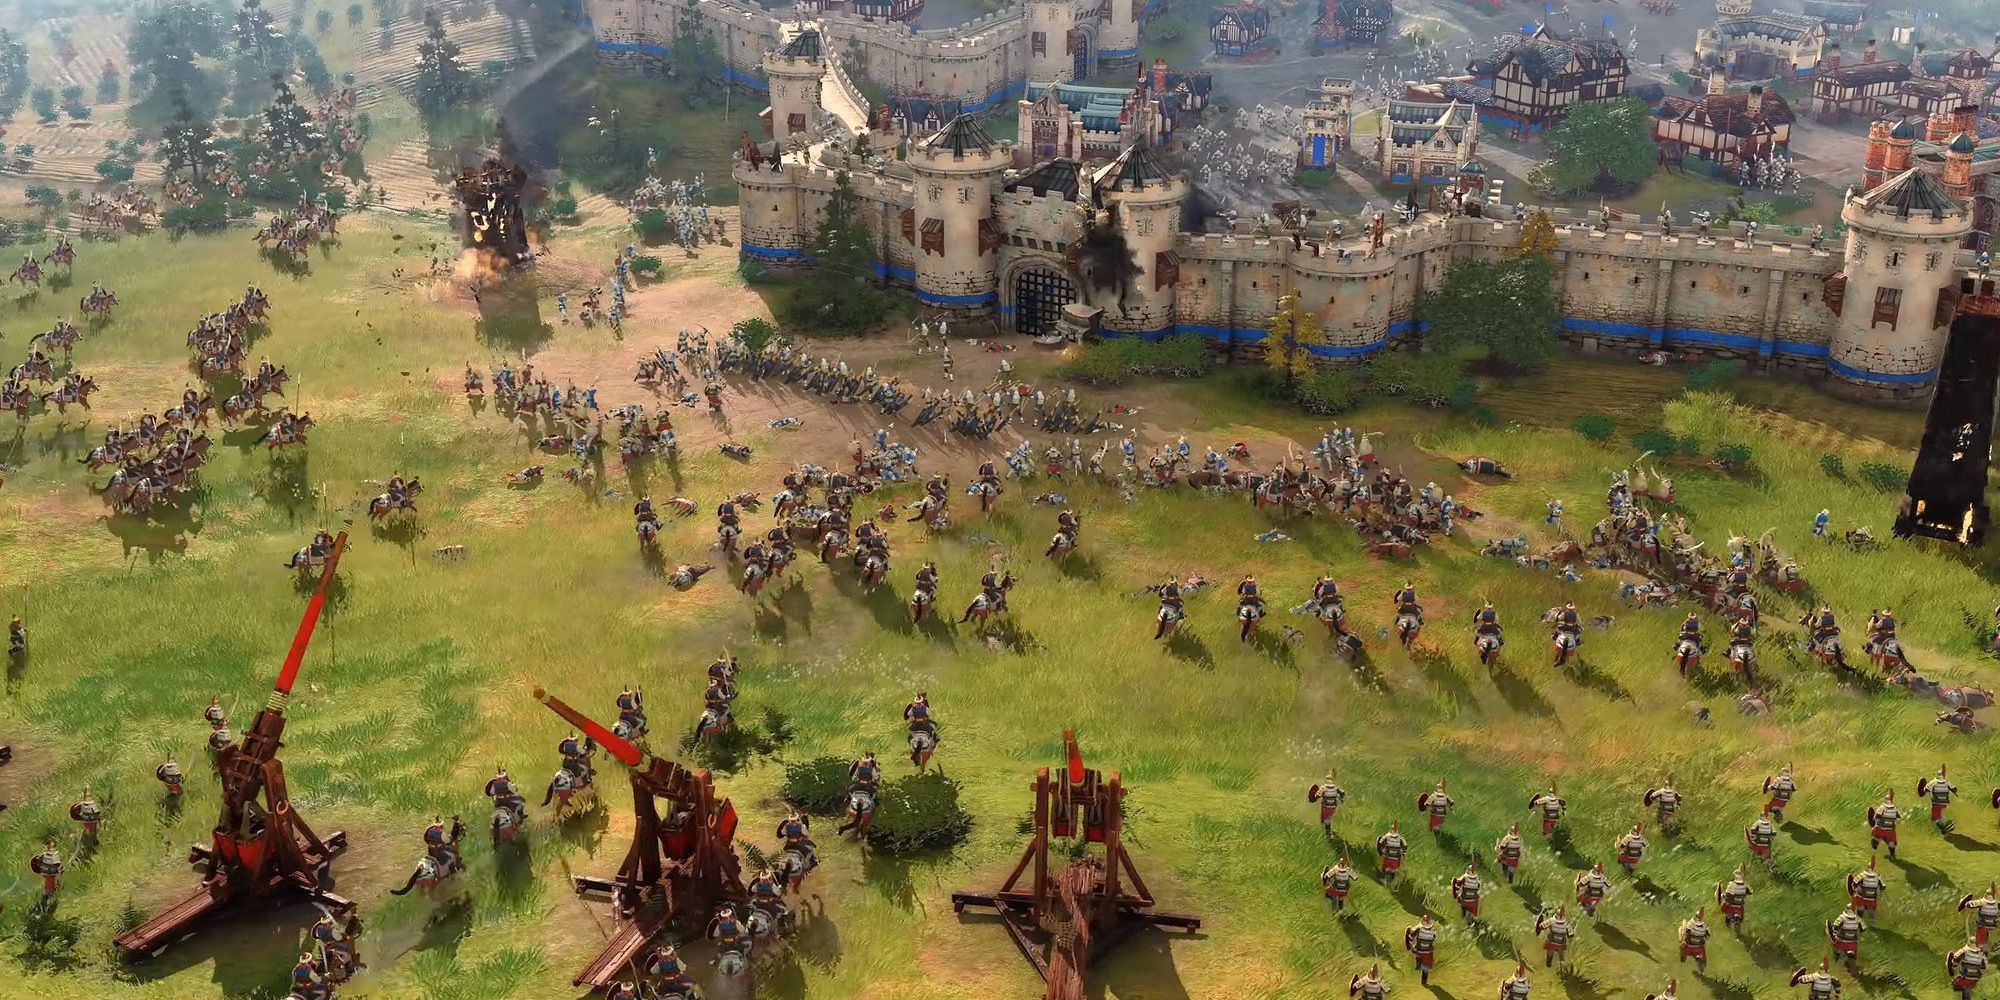 A massive siege is taking place in front of a fortified wall surrounding a castle village in Age of Empires IV